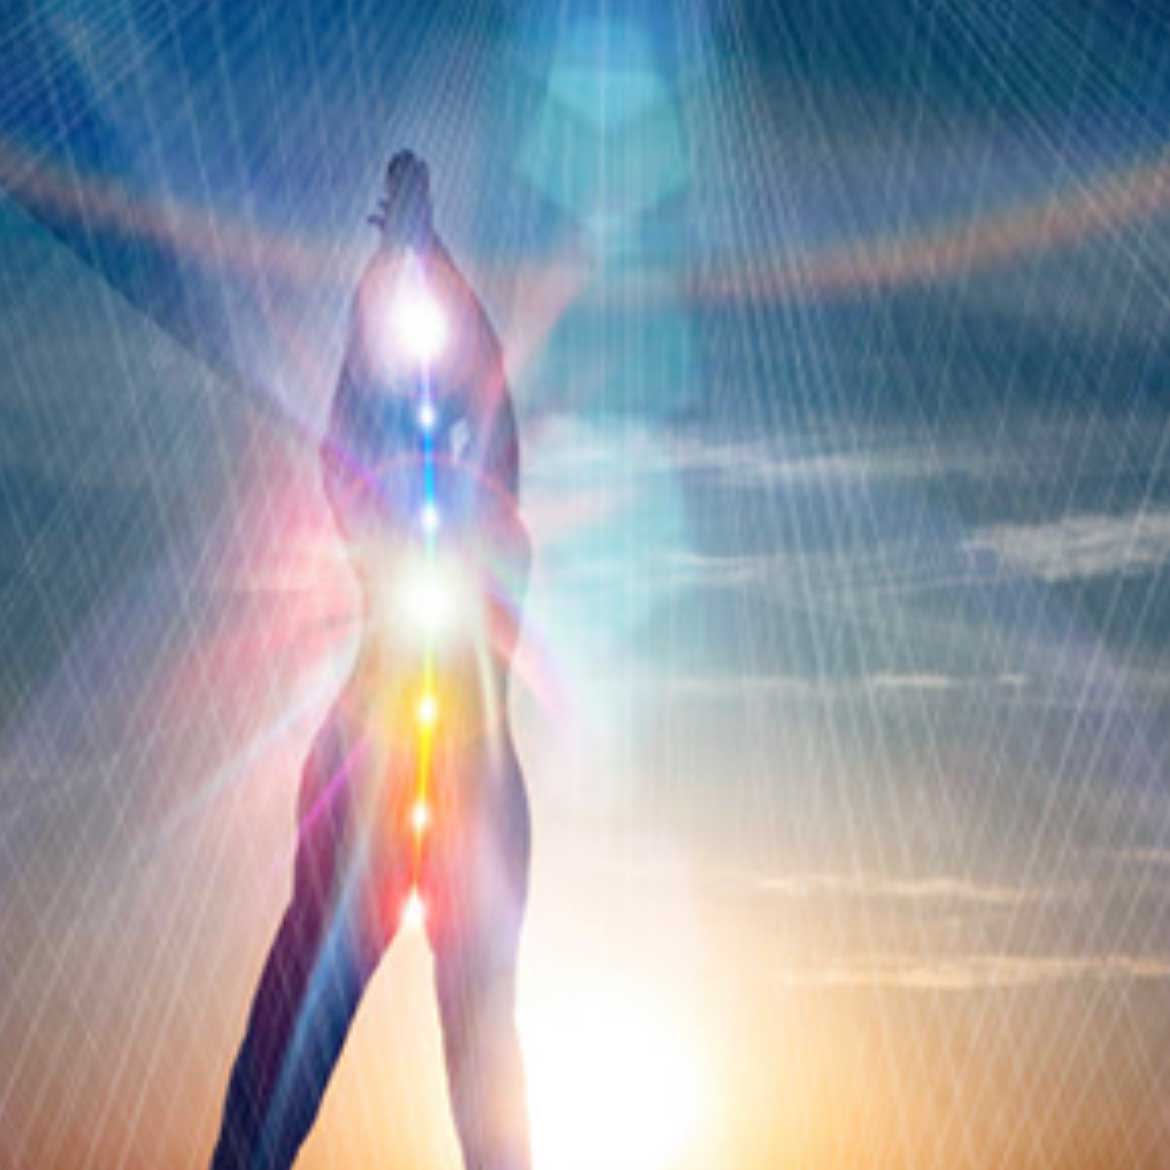 Image of a person with chakras, arms raised